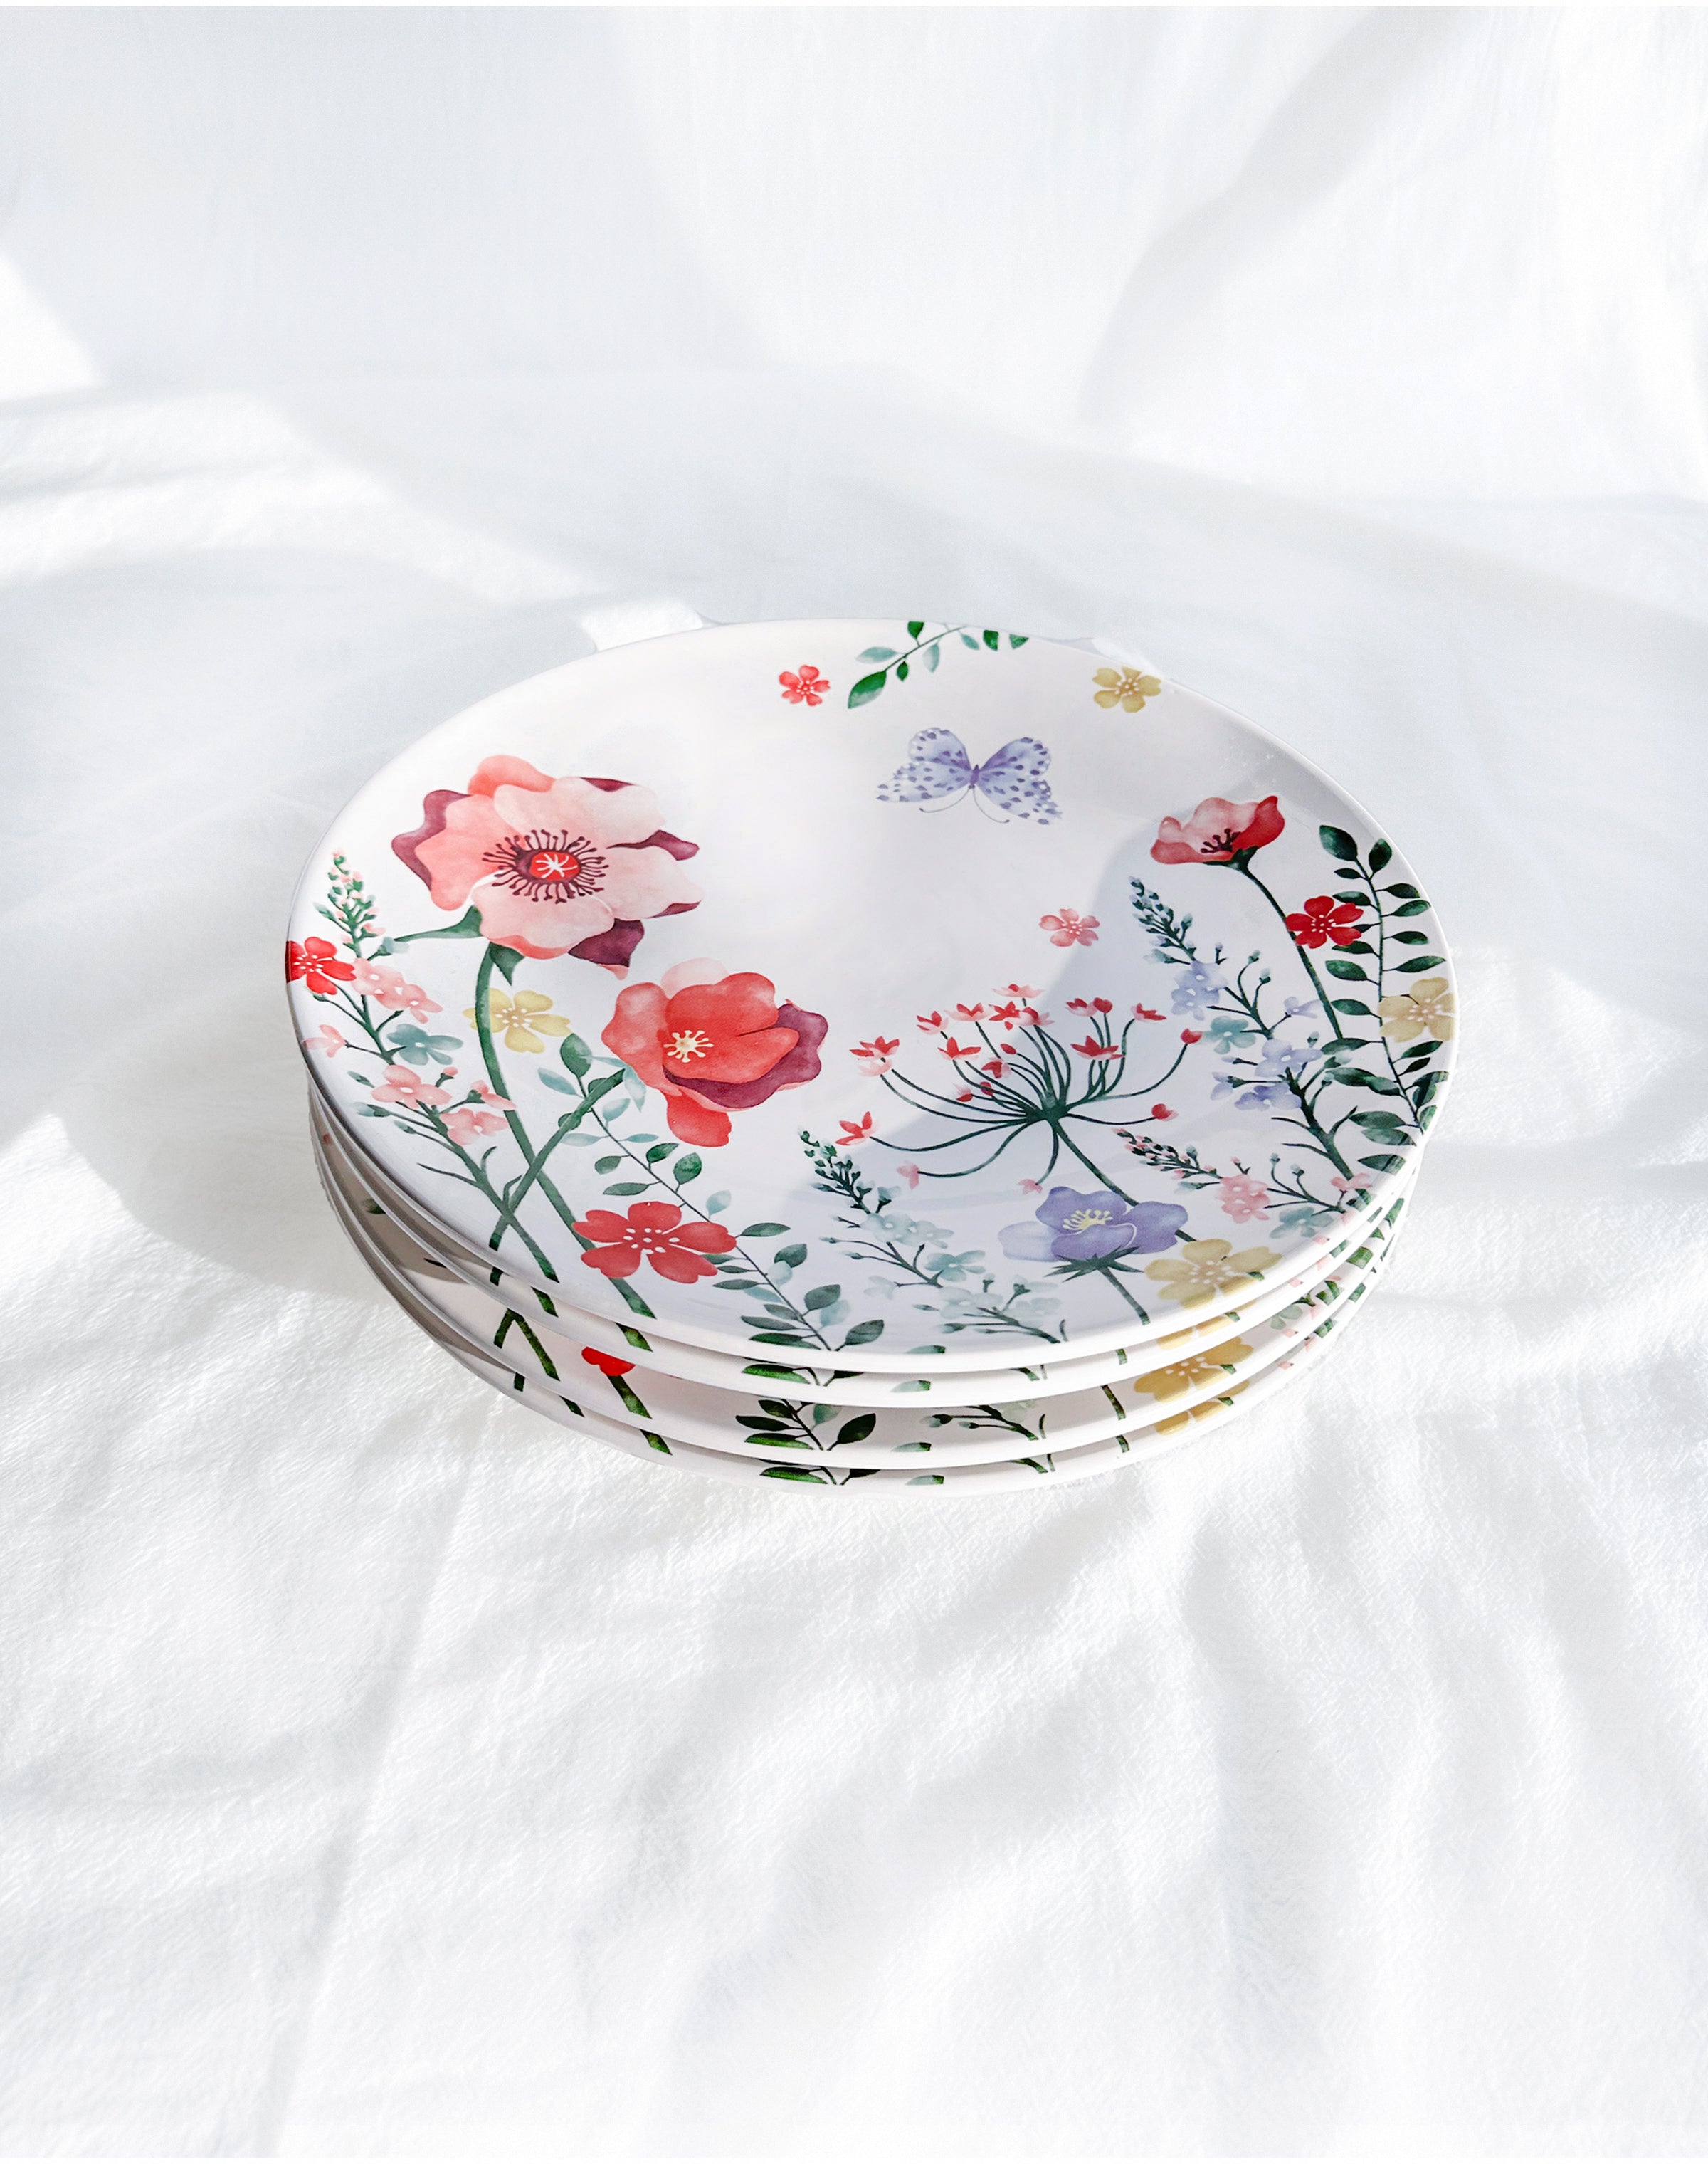 Wildflower Meadow with Poppy Flowers Dinner Plates, Set of 4